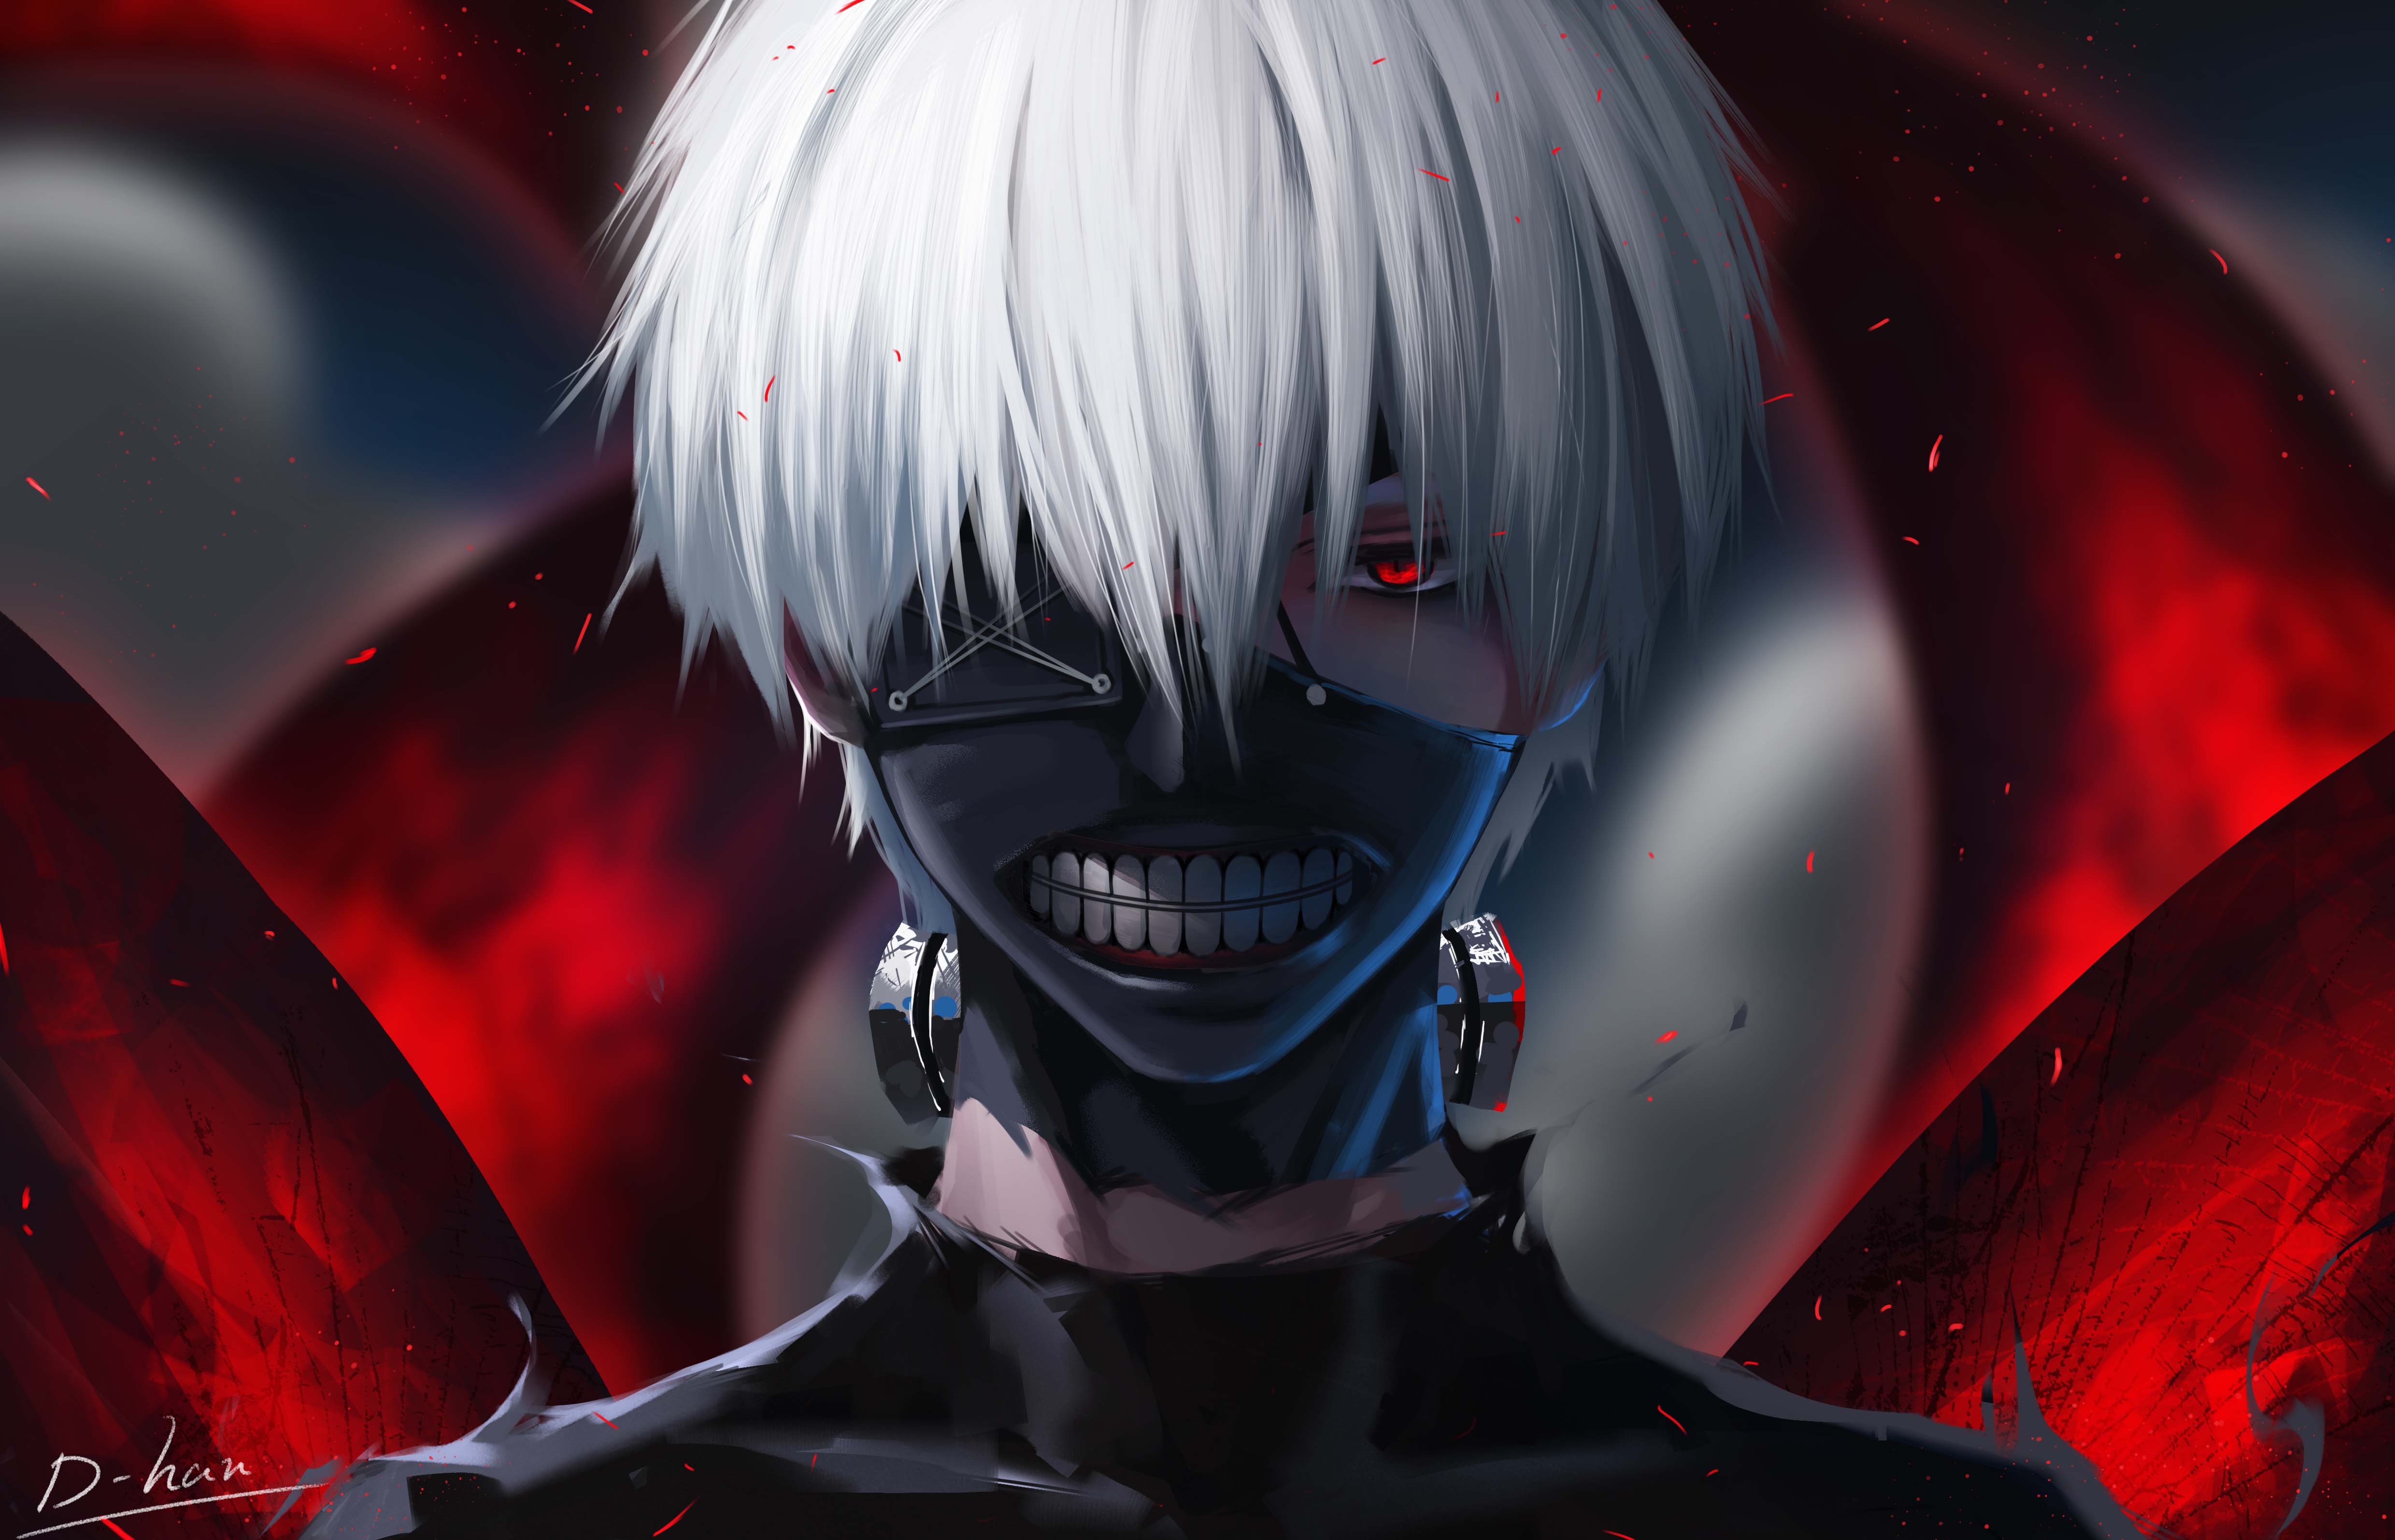 tokyo ghoul wallpaper 1080p,anime,cg artwork,fictional character,animation,space